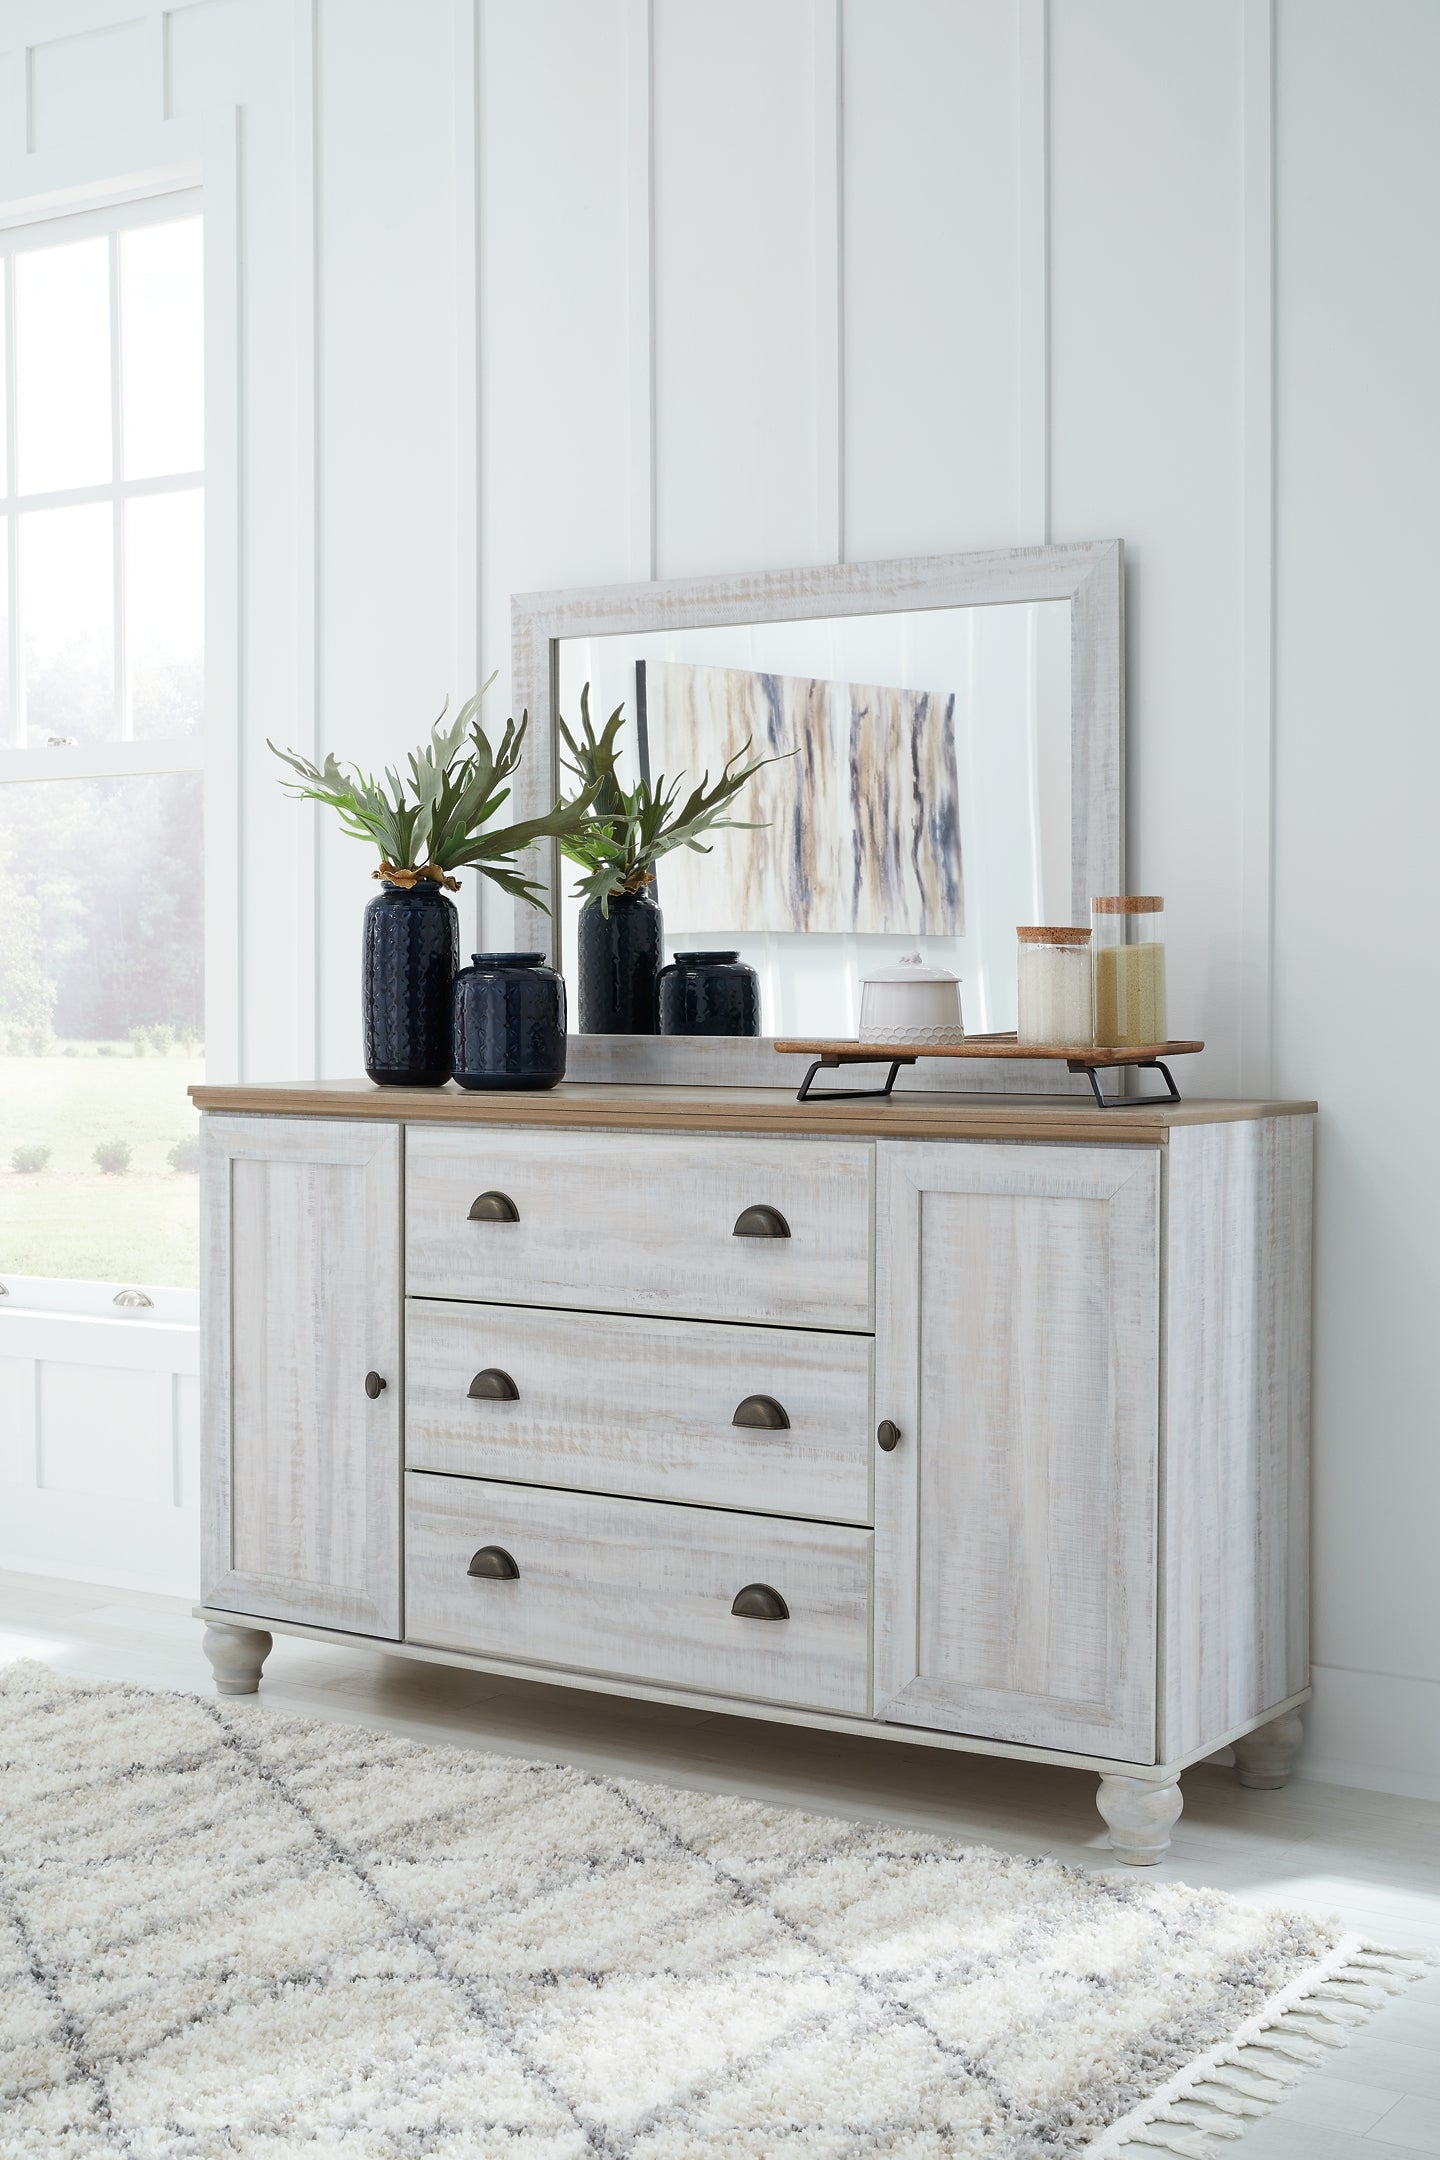 Haven Bay Queen Panel Bed with Mirrored Dresser